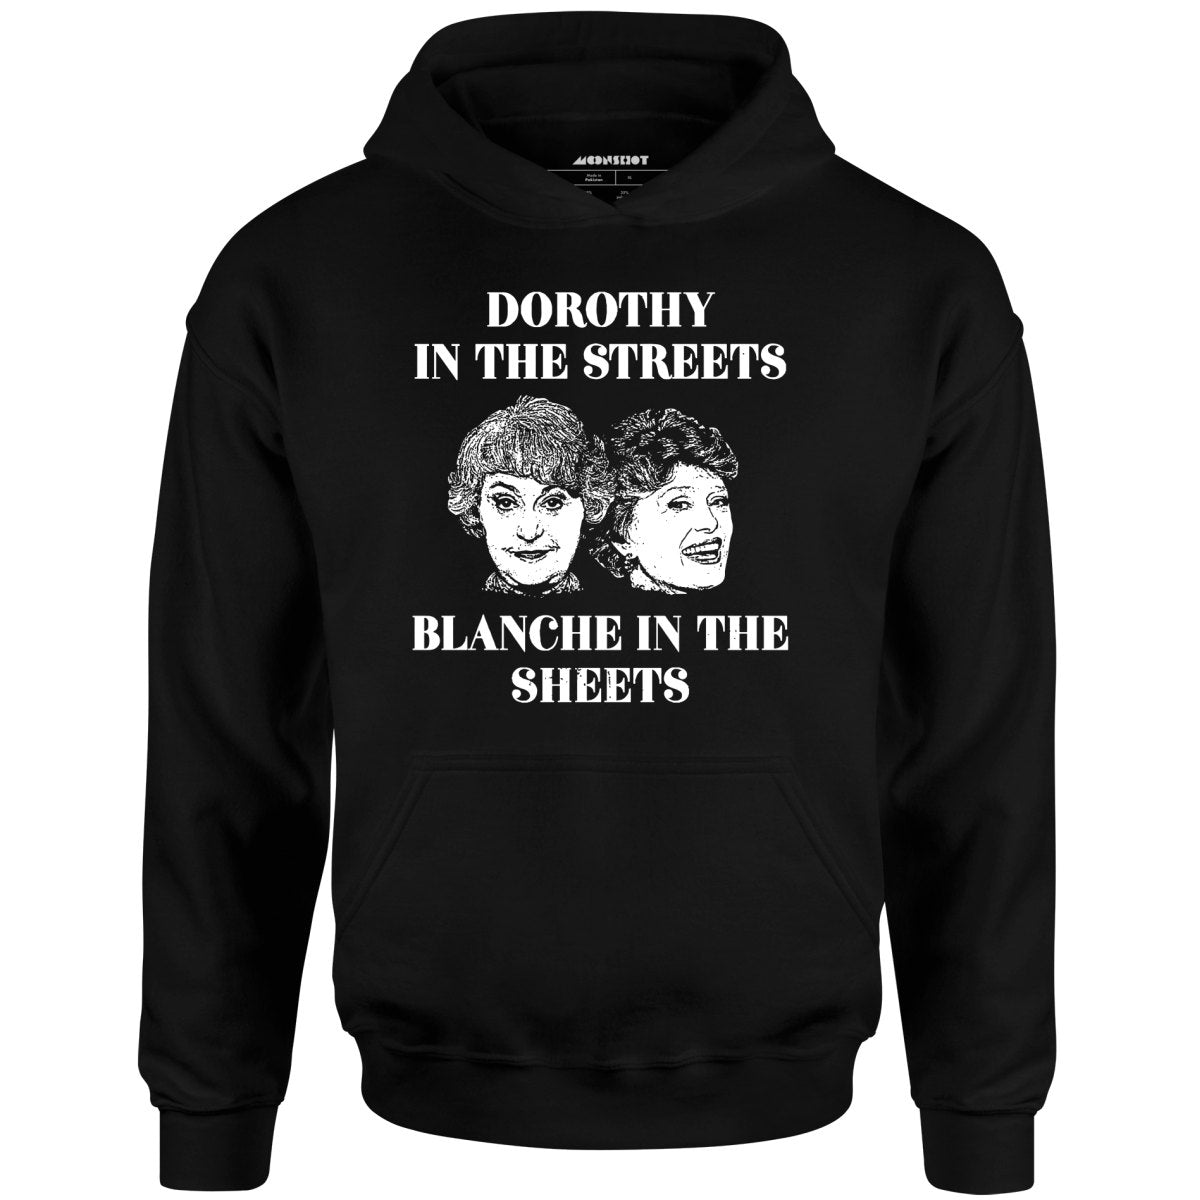 Dorothy in the Streets Blanche in the Sheets - Unisex Hoodie